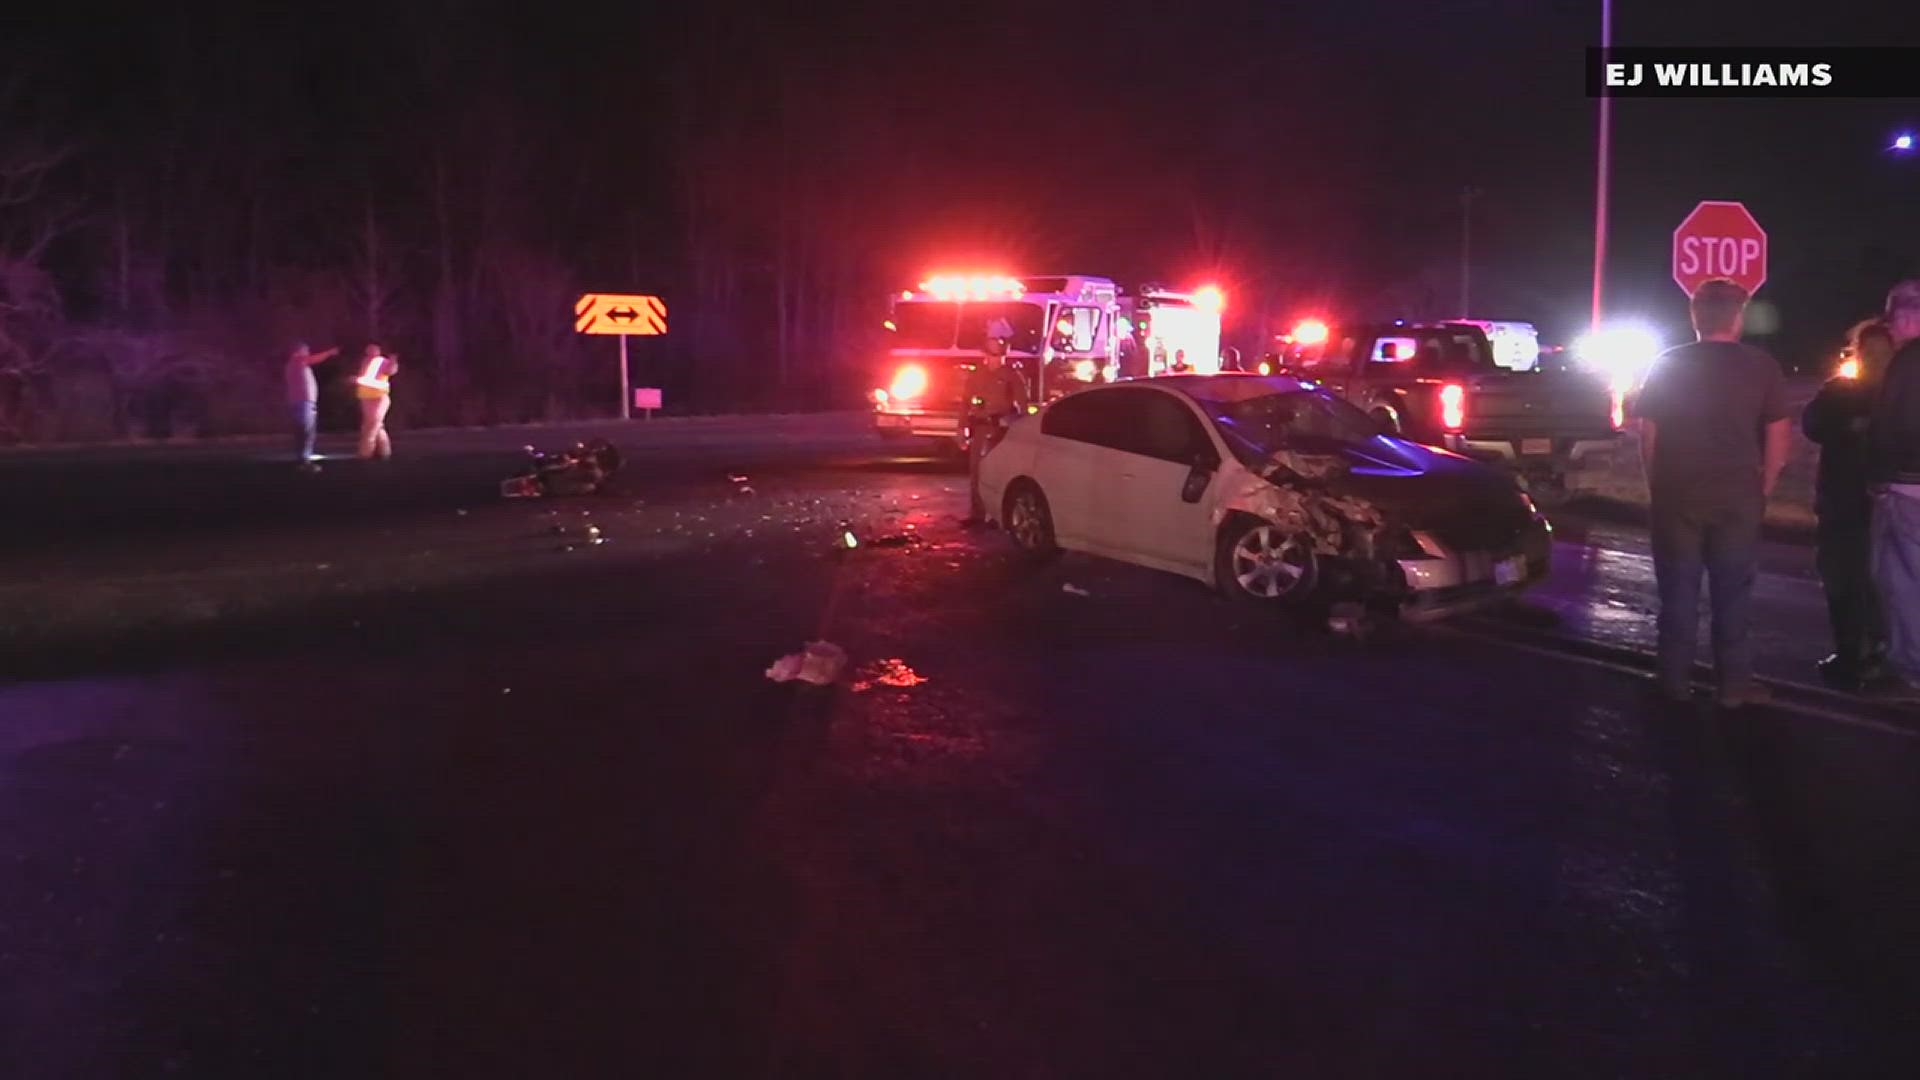 Texas DPS is investigating after three people were injured in a multi-vehicle wreck on Highway 62 near Mauriceville, Lt. Chuck Havard told 12News.